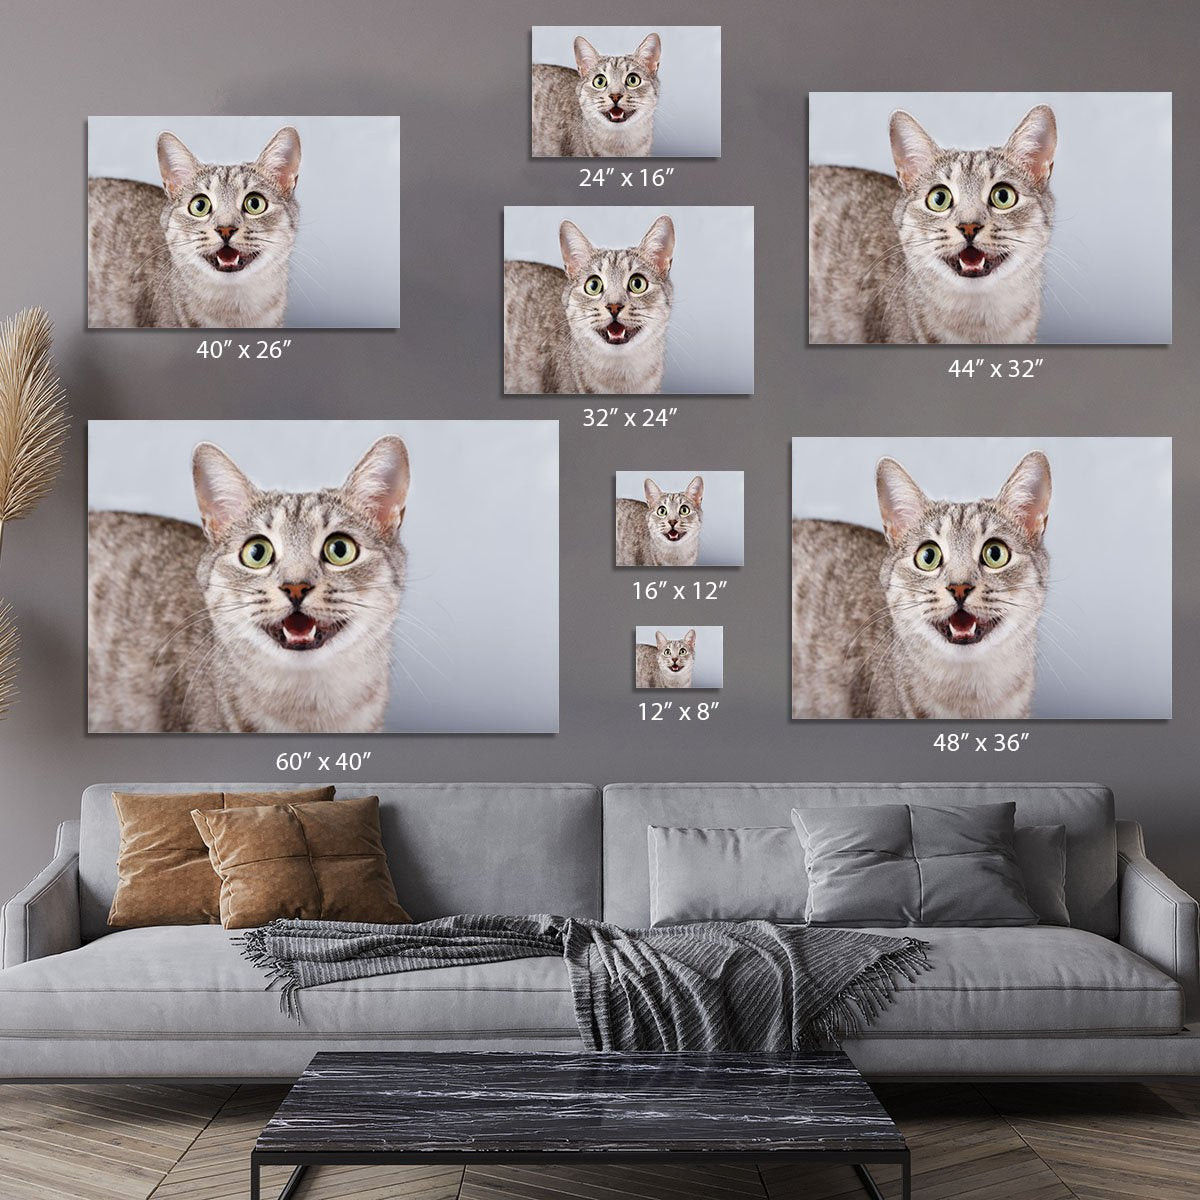 Cat meows gray tabby Shorthair Canvas Print or Poster